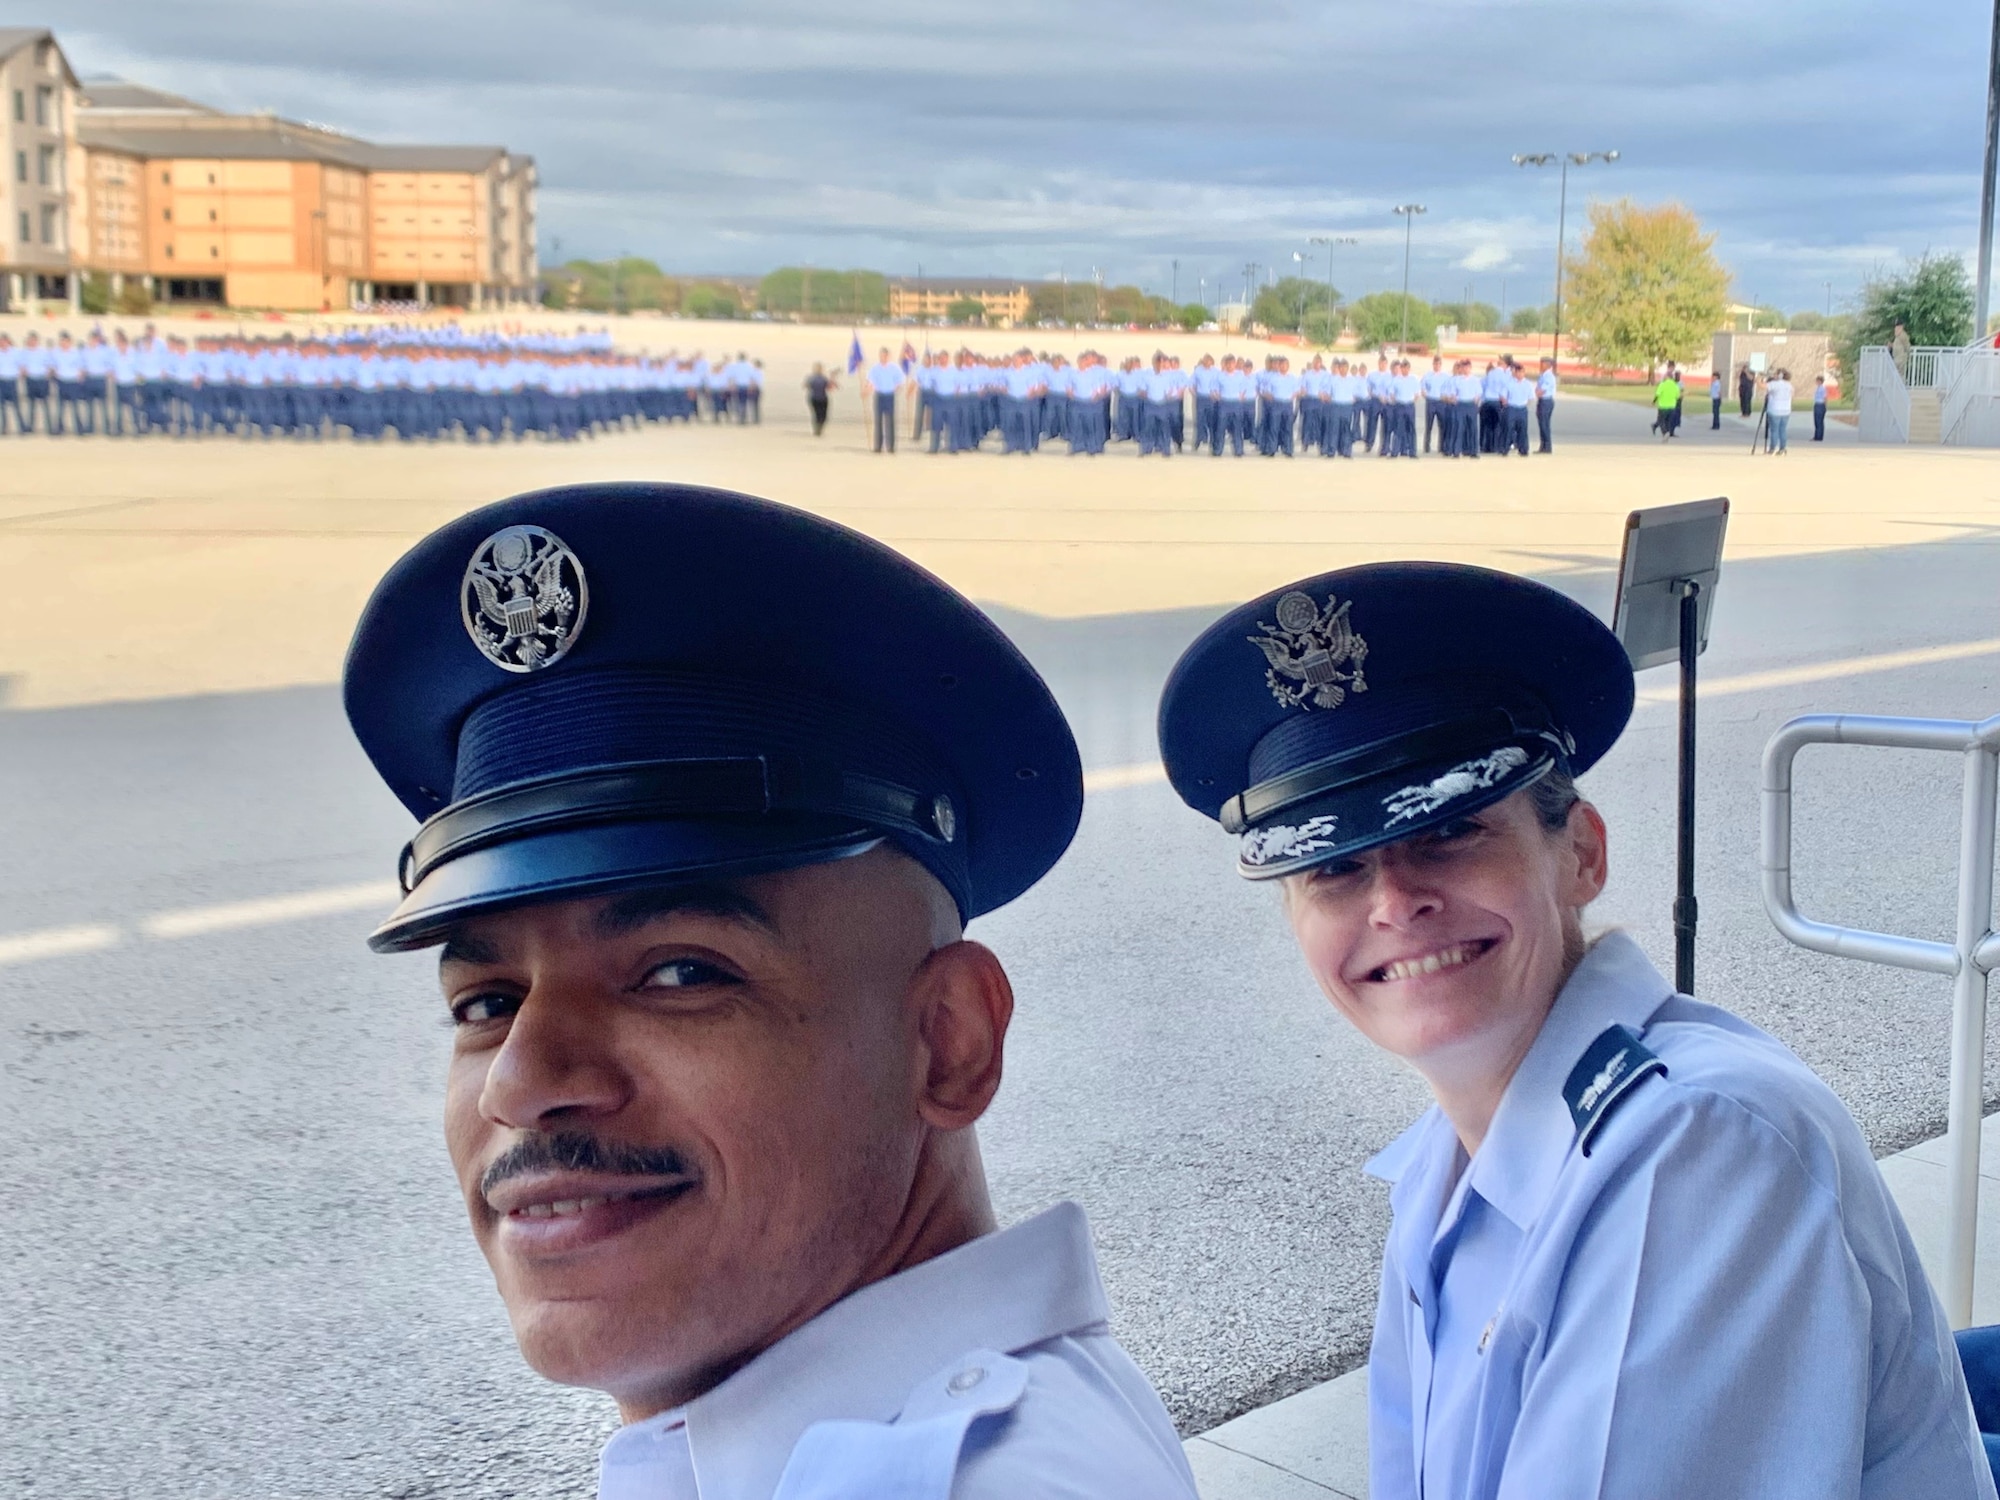 CMSgt Gravely and Col Storm in the stands at BMT graduation